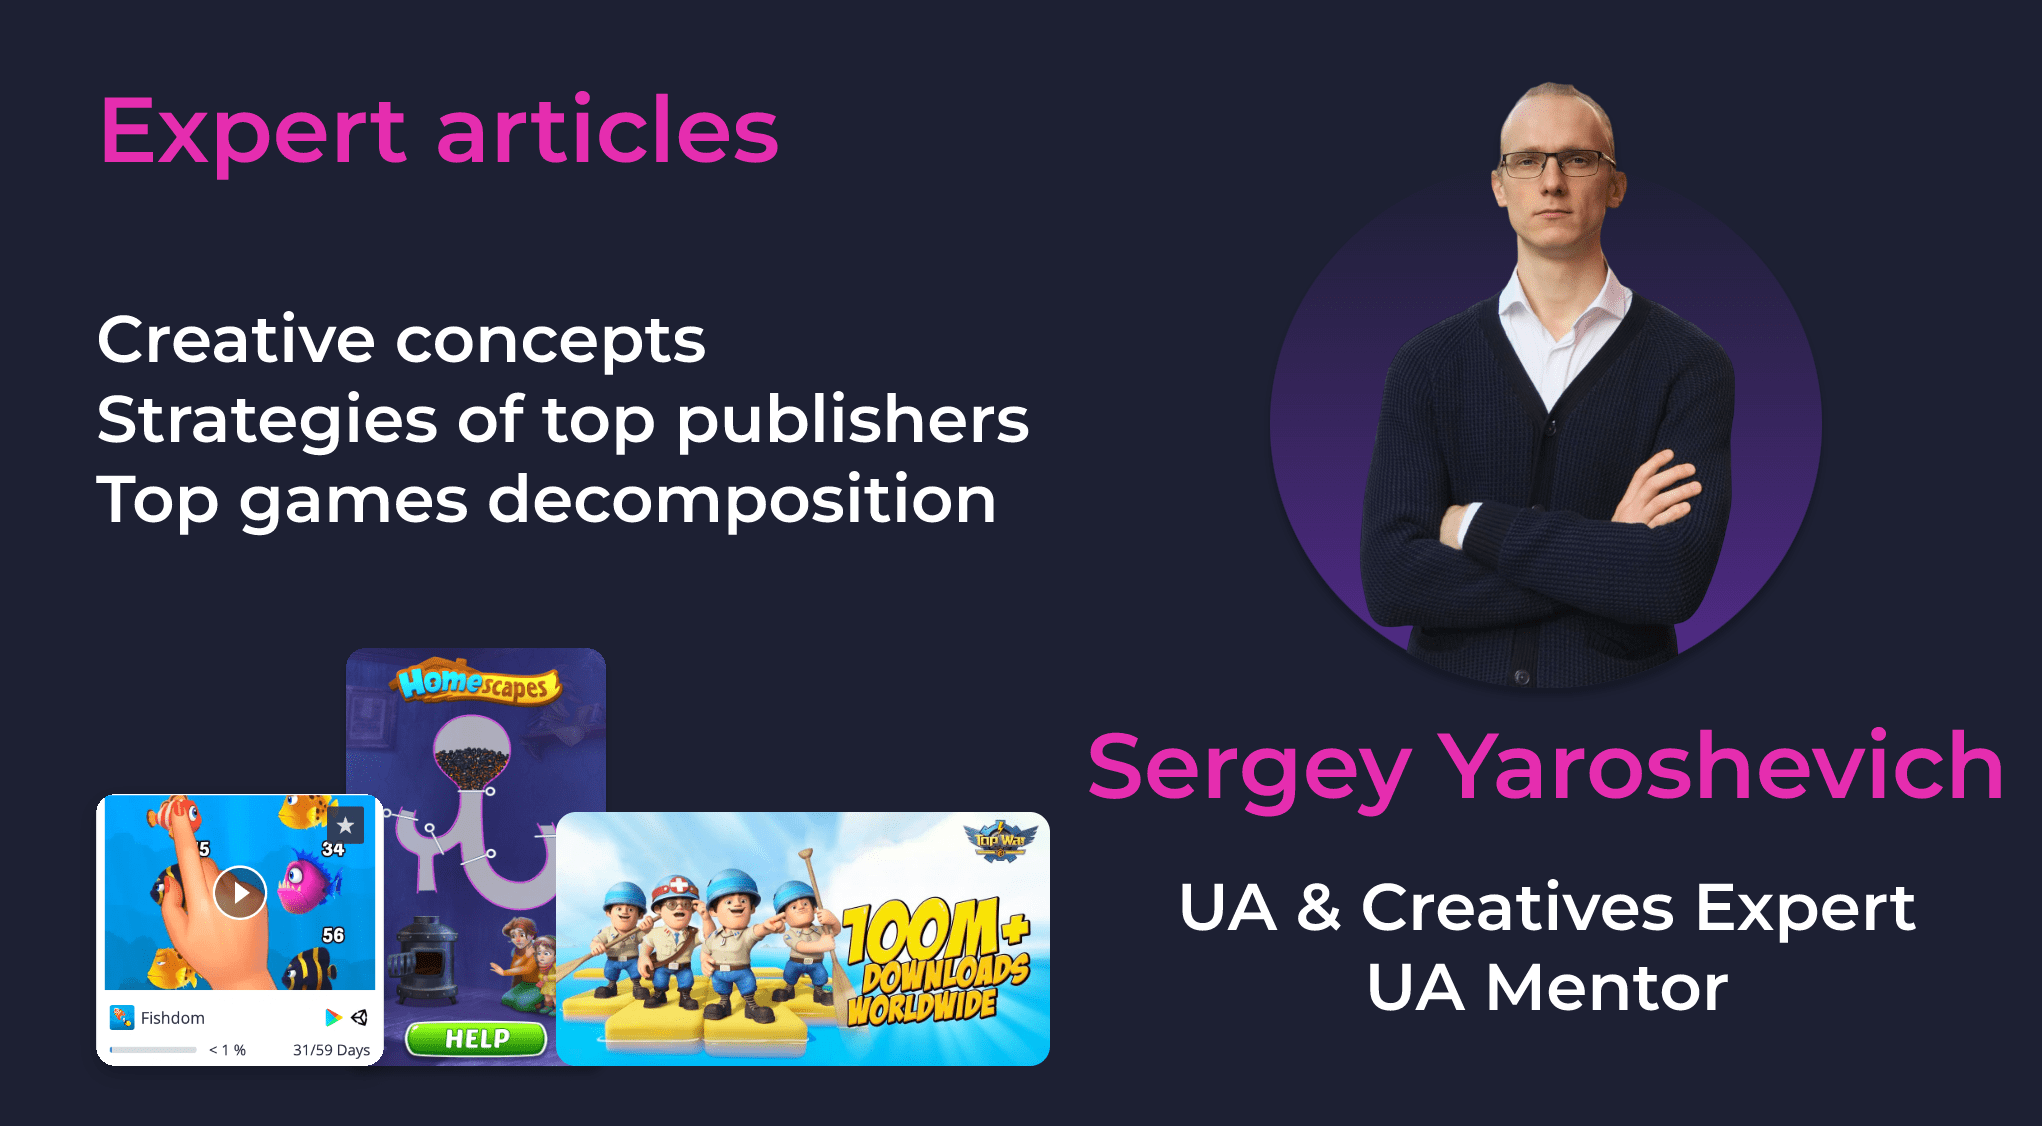 Cradle of knowledge by Sergey Yaroshevich: creative concepts, strategies of top publishers, top games decomposition and much more!